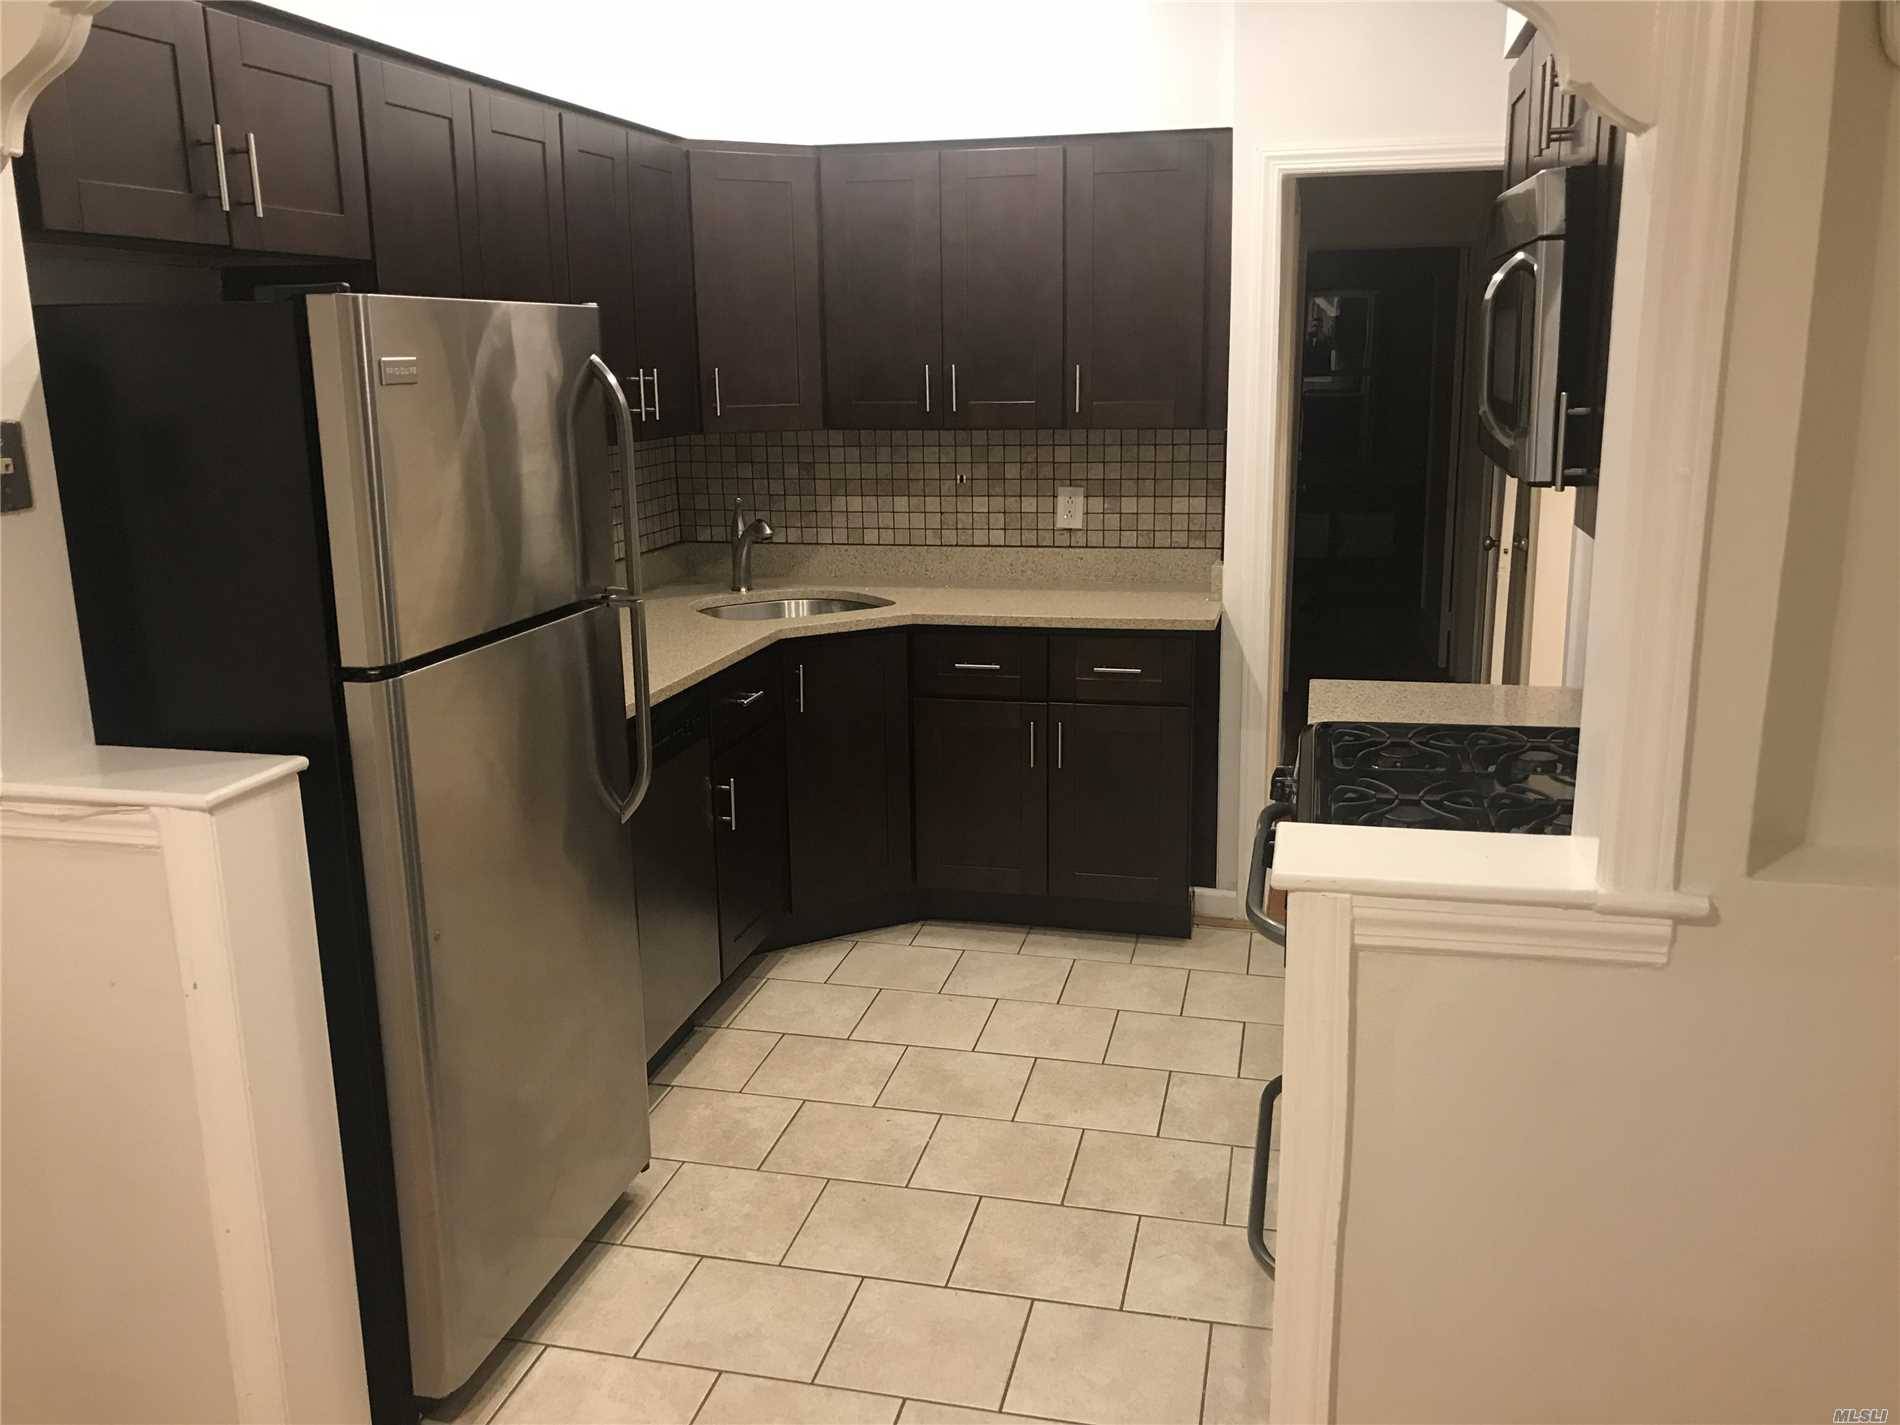 For Rent***  2 Bedroom, 2 Bath, House In Astoria (45th St And 20th Ave) Updated Kitchen.